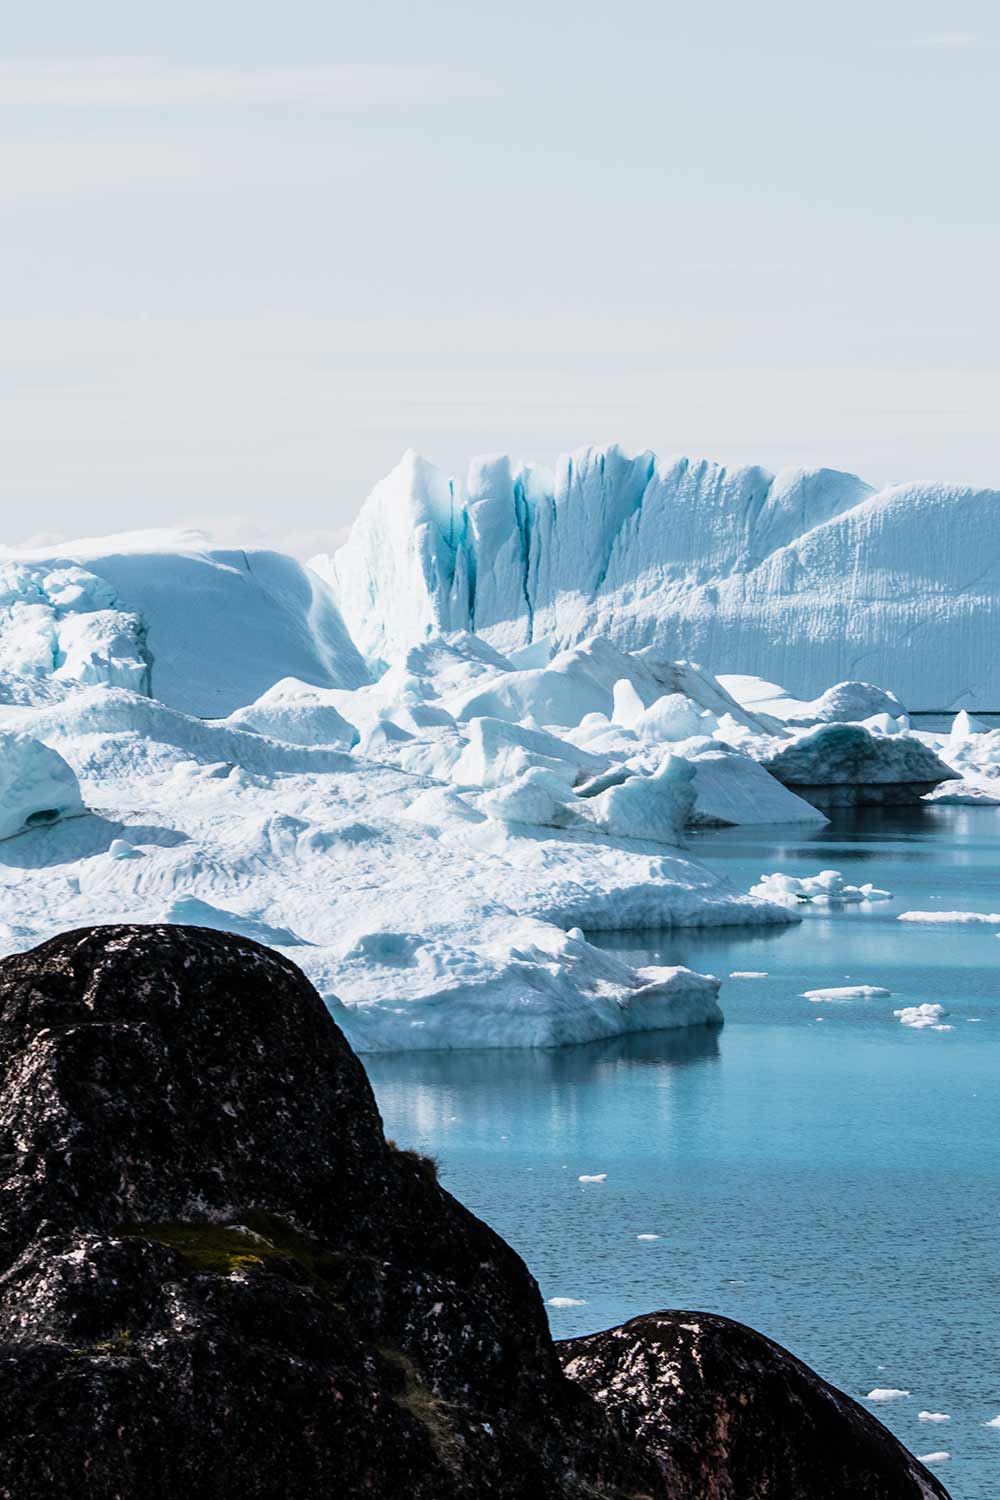 Exploring the wonders of Ilulissat Icefjord: Spectacular scenes in a 10-day Greenland itinerary